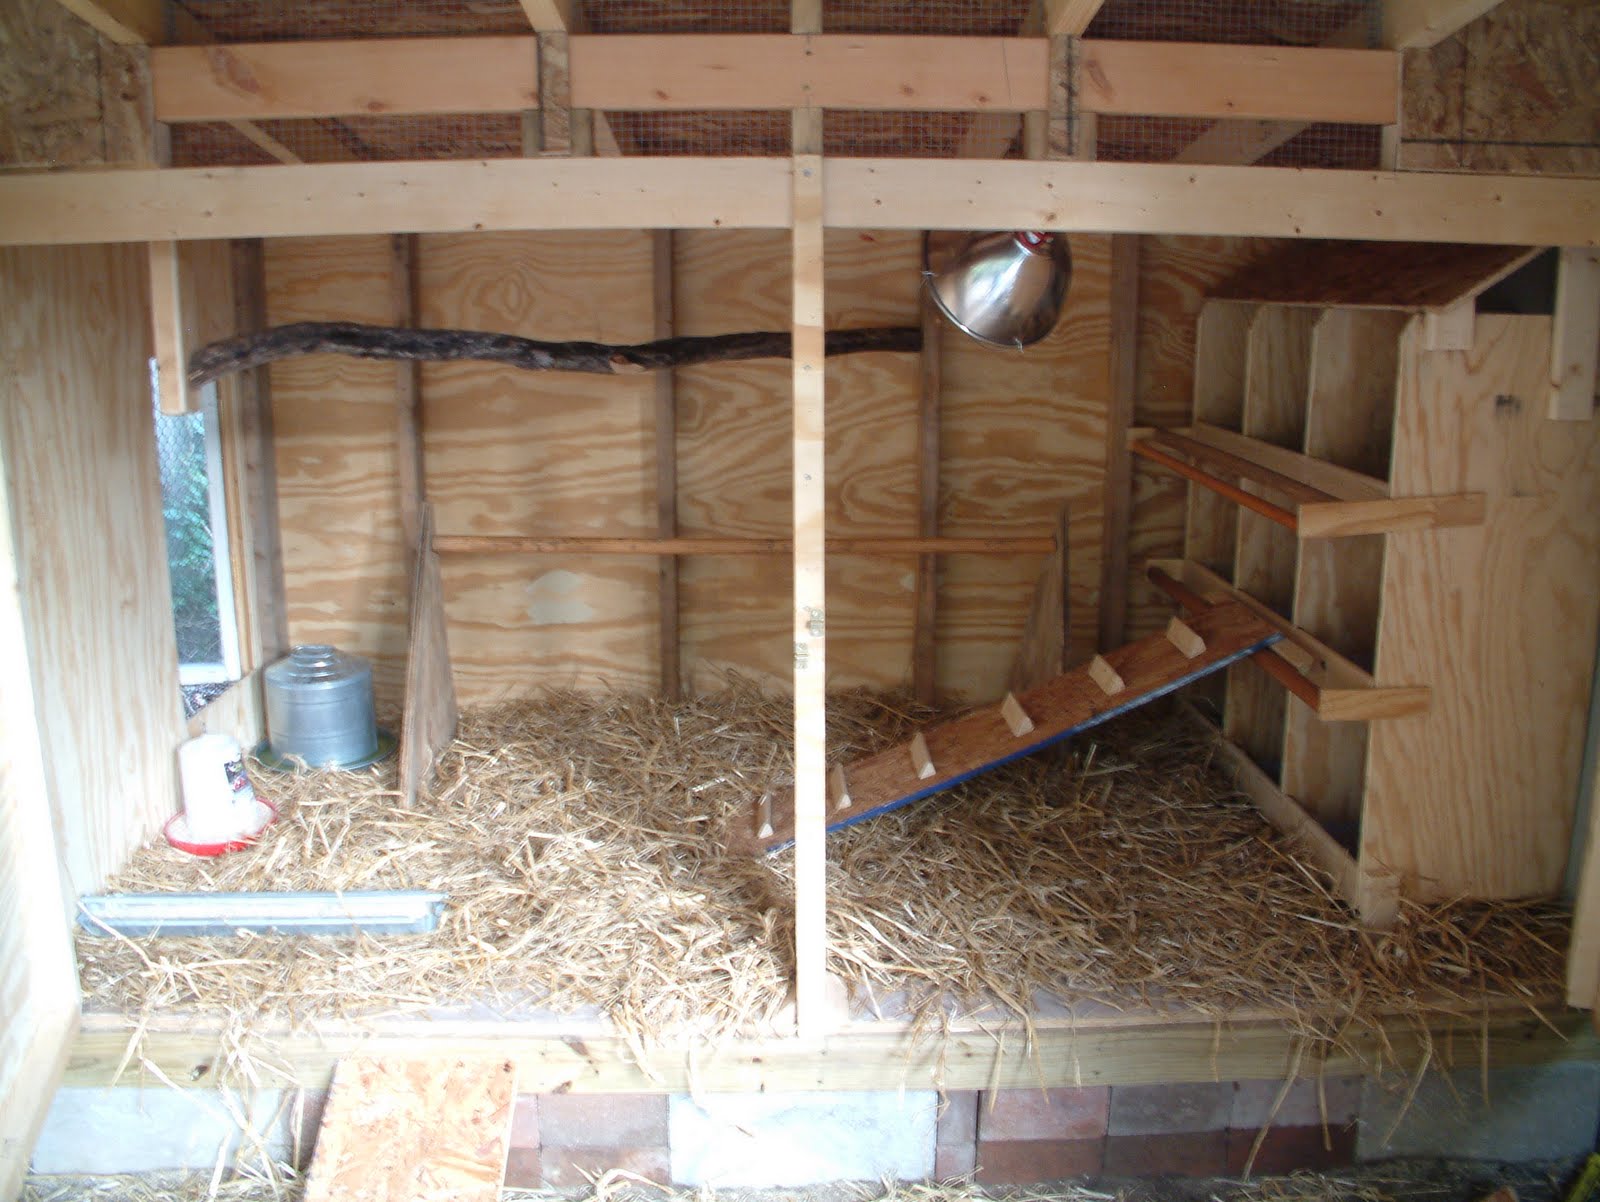  Spivey Family: Chicken Coop Progress &amp; New Nest Boxes for the Coop